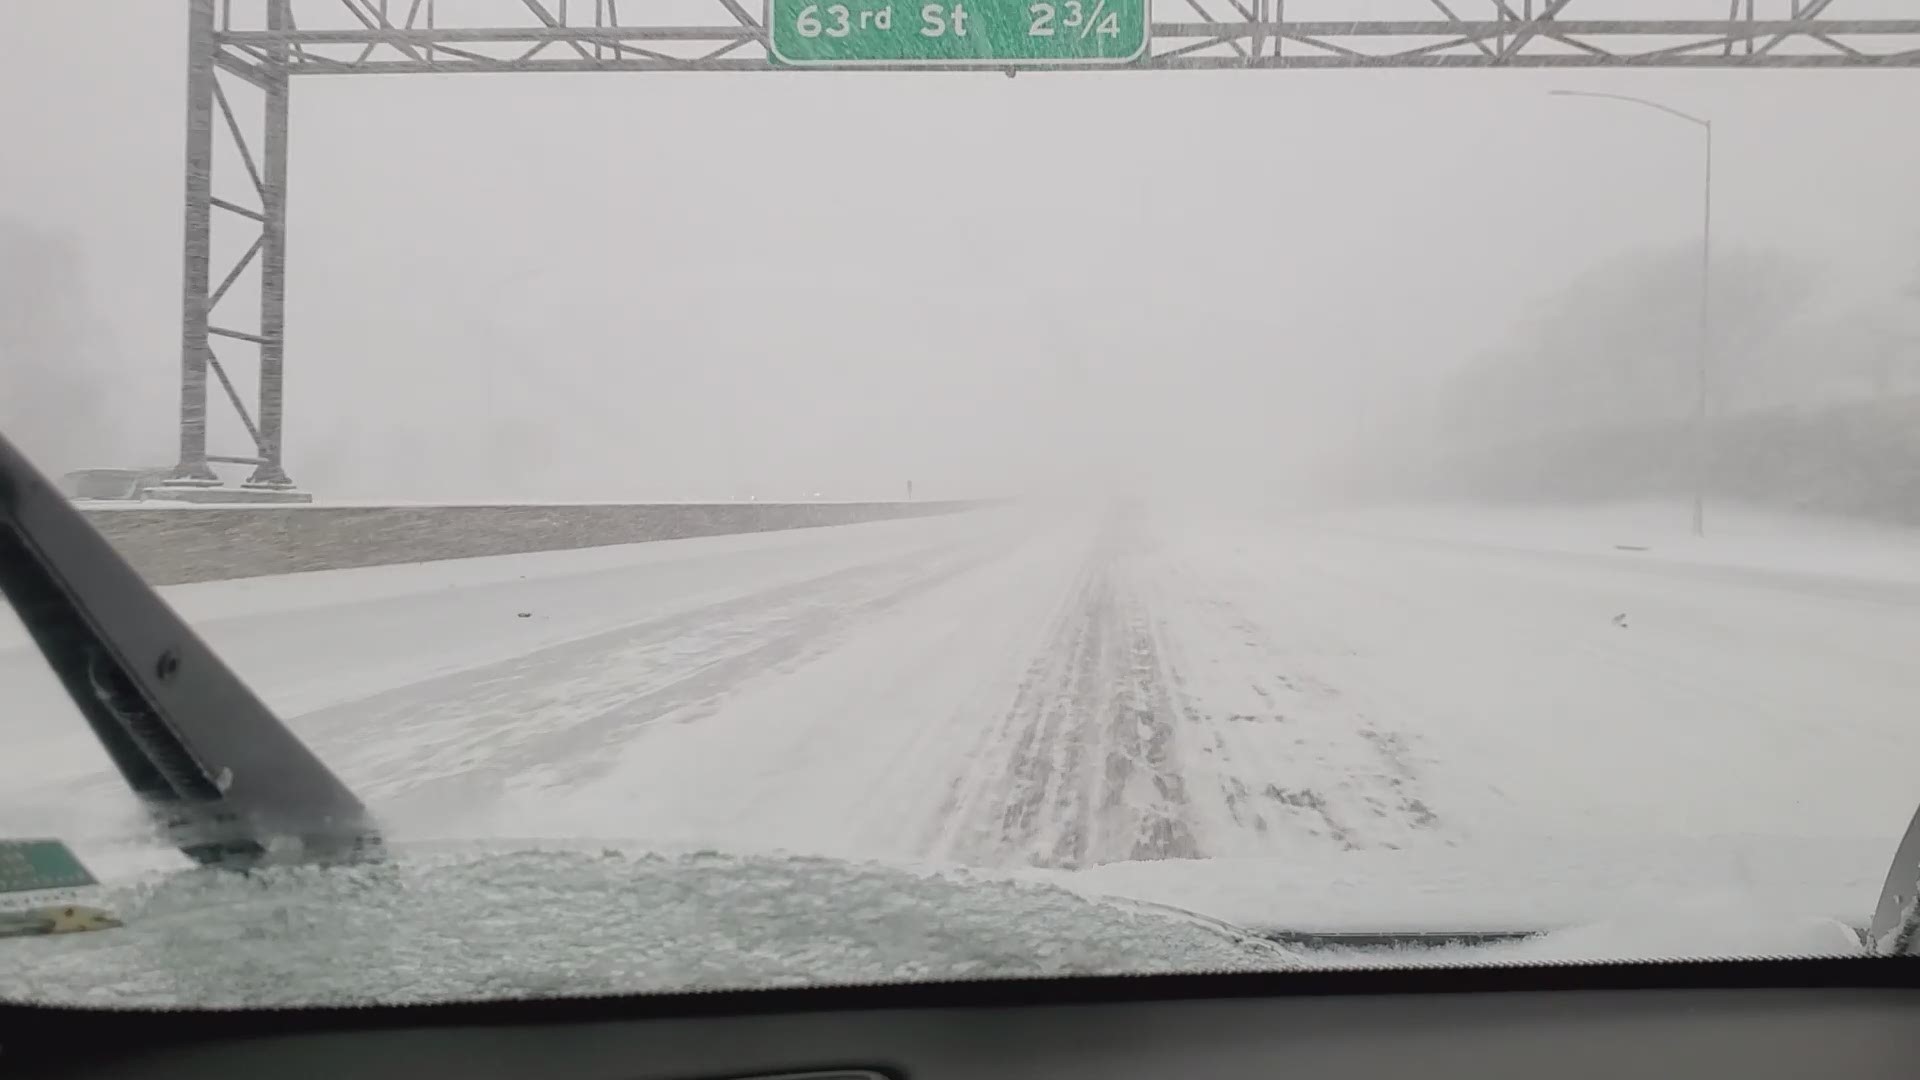 Tuesday's storm brought in lots of snow. Here's a look at I-235 during it.